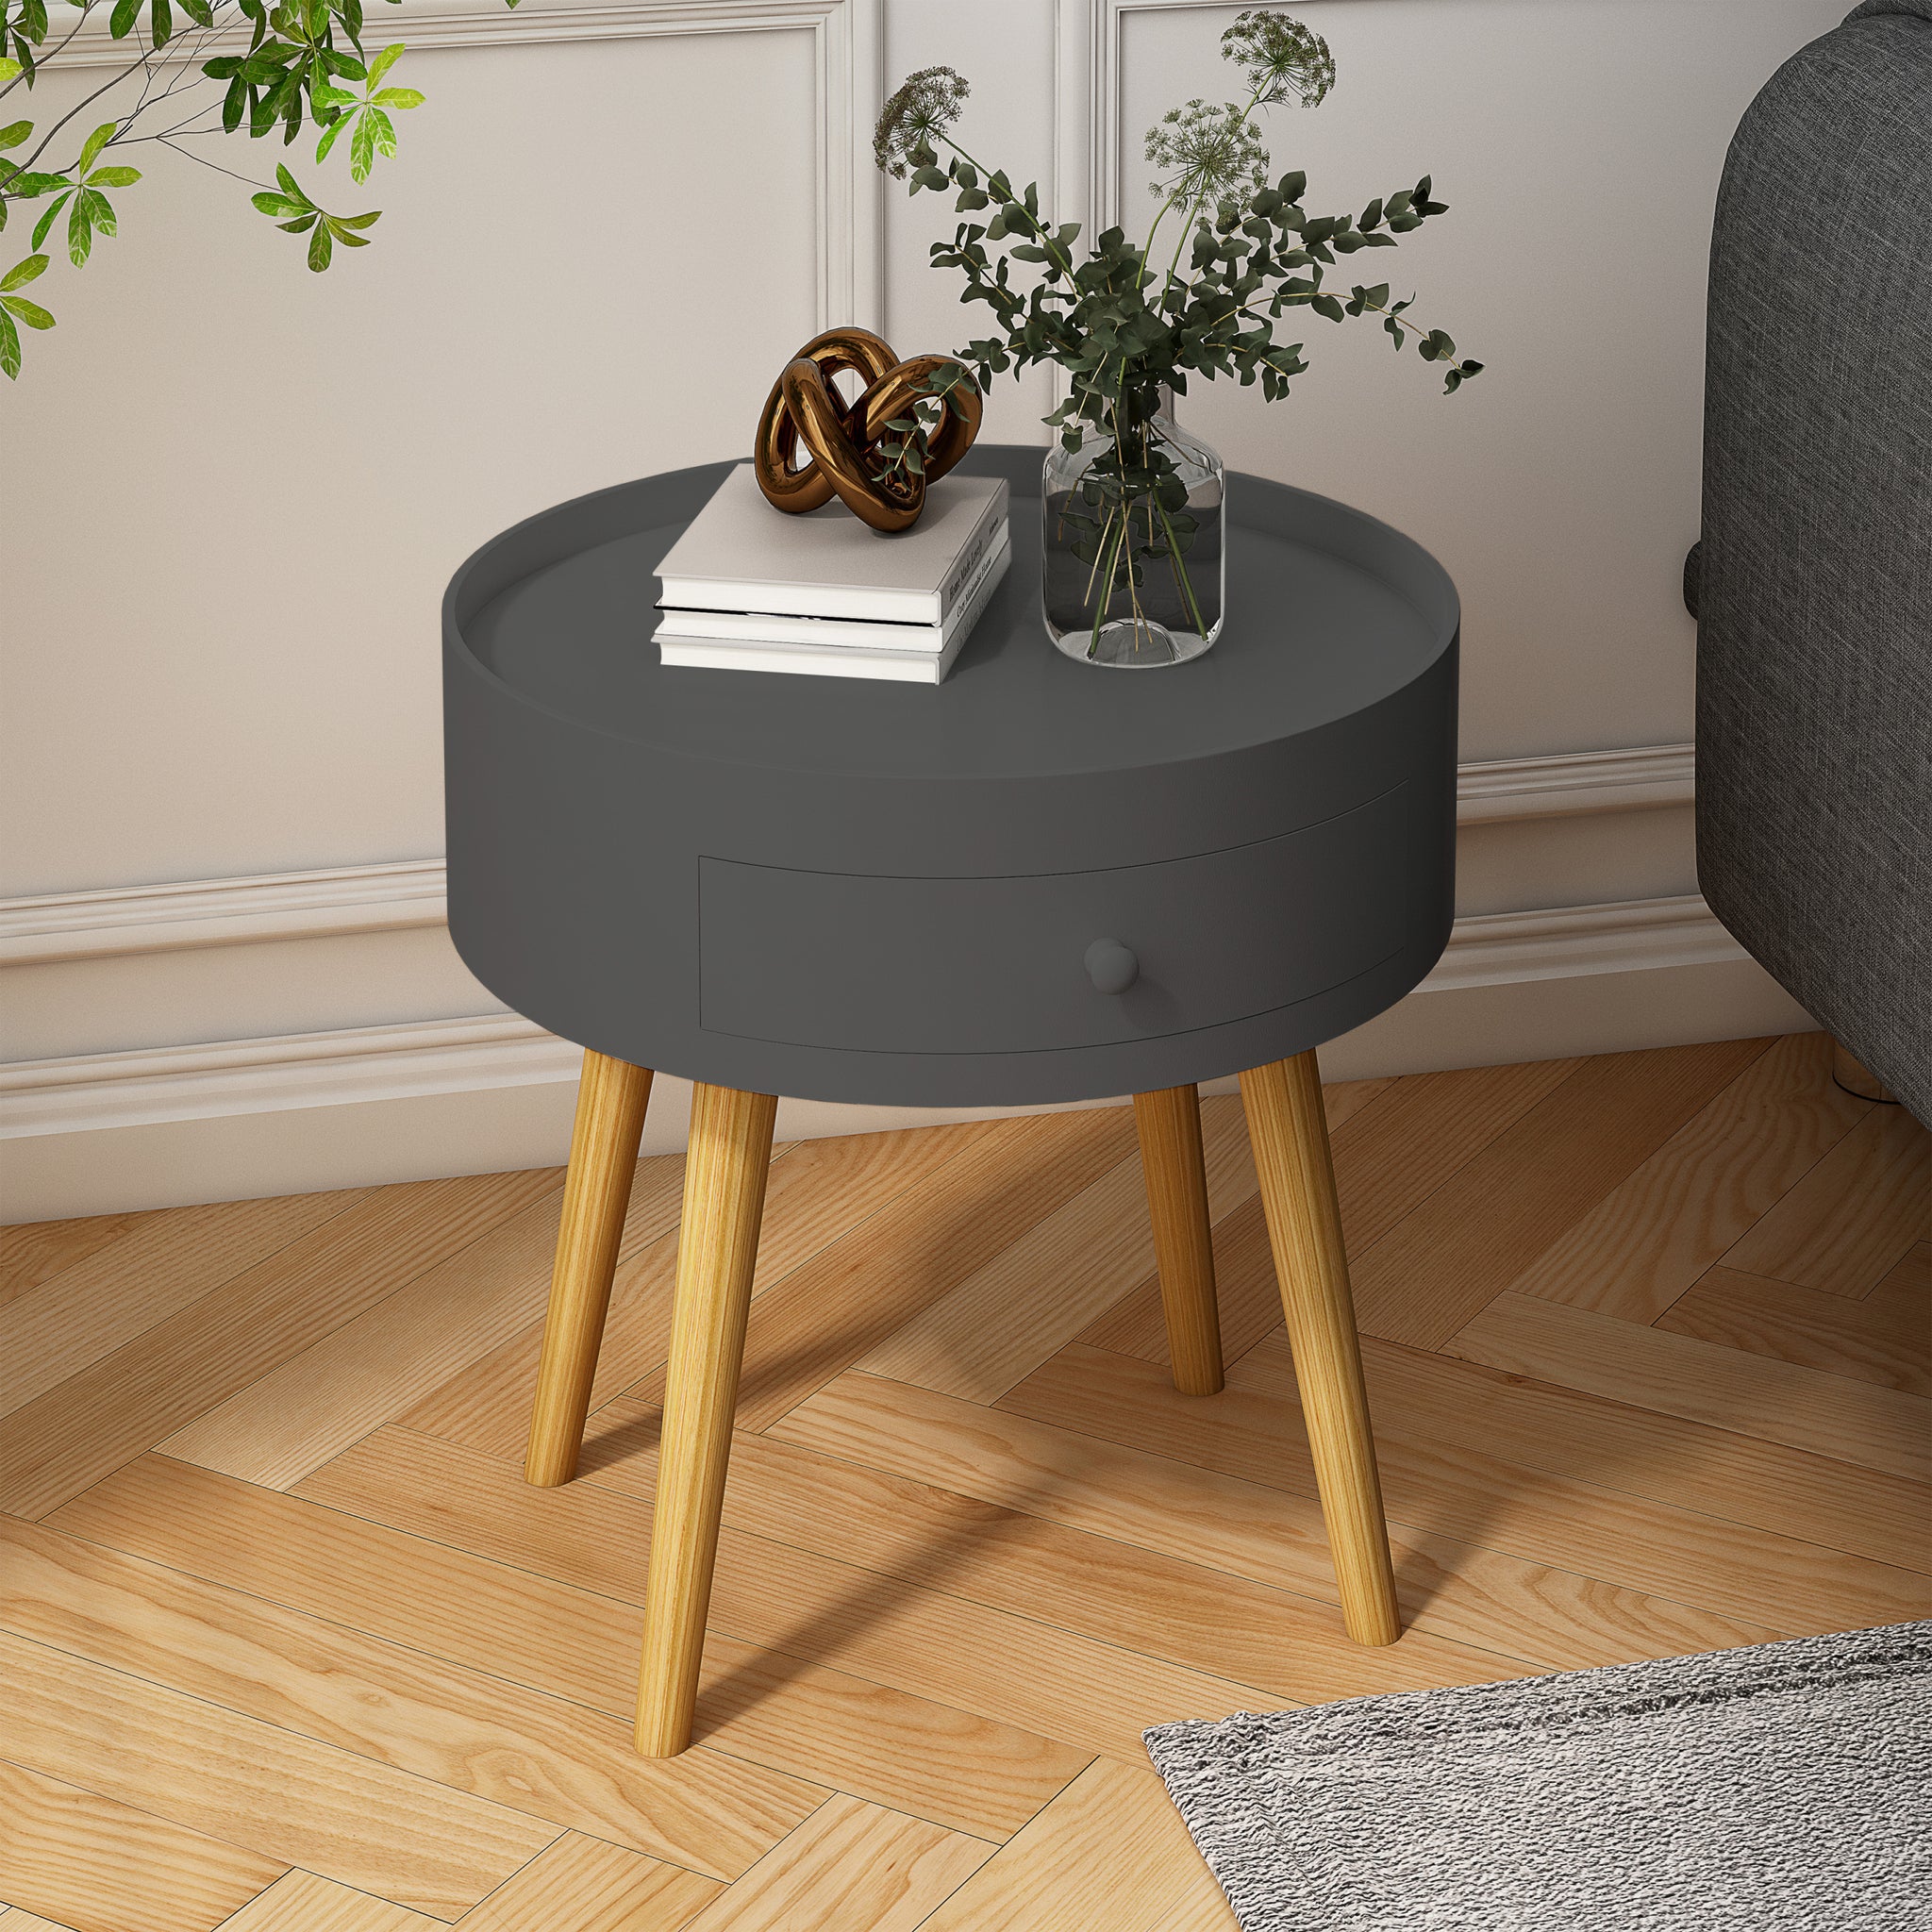 Modern Coffee Table with Drawer, Bedside Table, Sofa gray-mdf